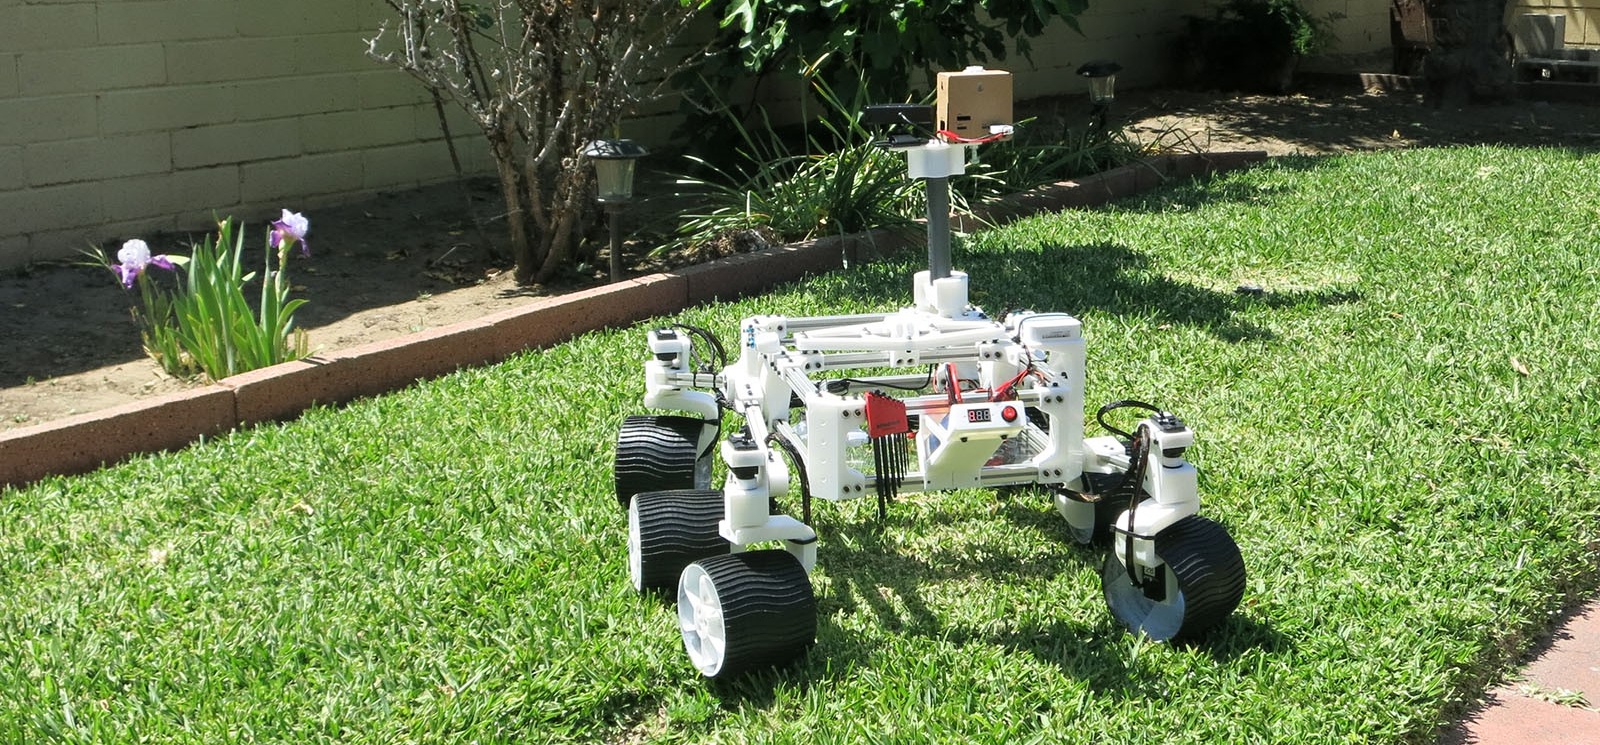 Image of Sawppy the rover